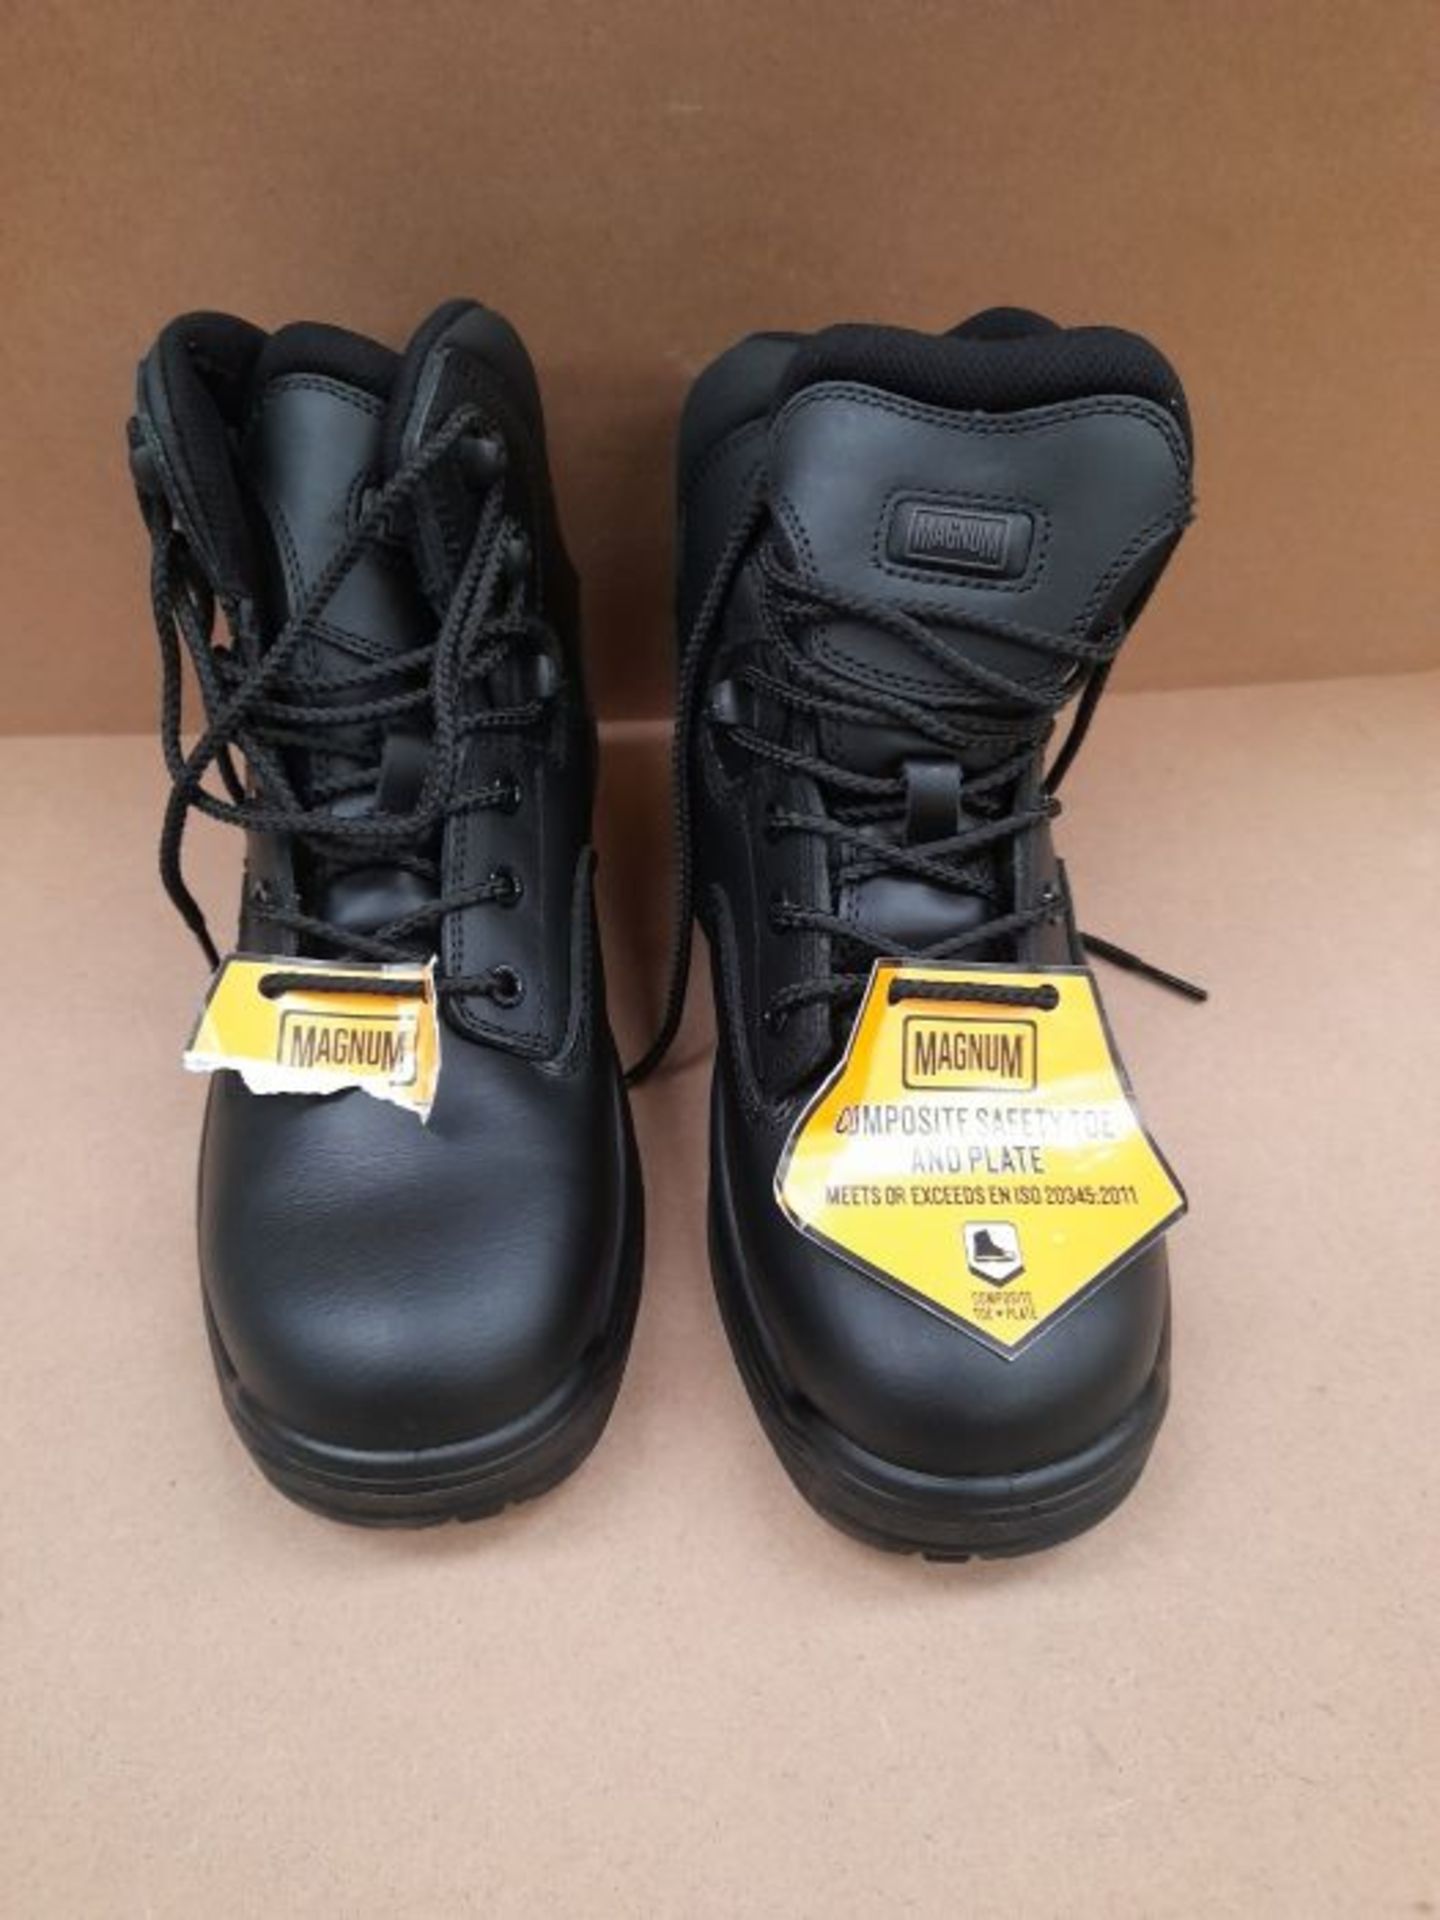 RRP £56.00 Magnum Unisex Adults' Precision SITEMASTER CT CP Work Boots, (Black 21), 6 UK 39 EU - Image 2 of 2